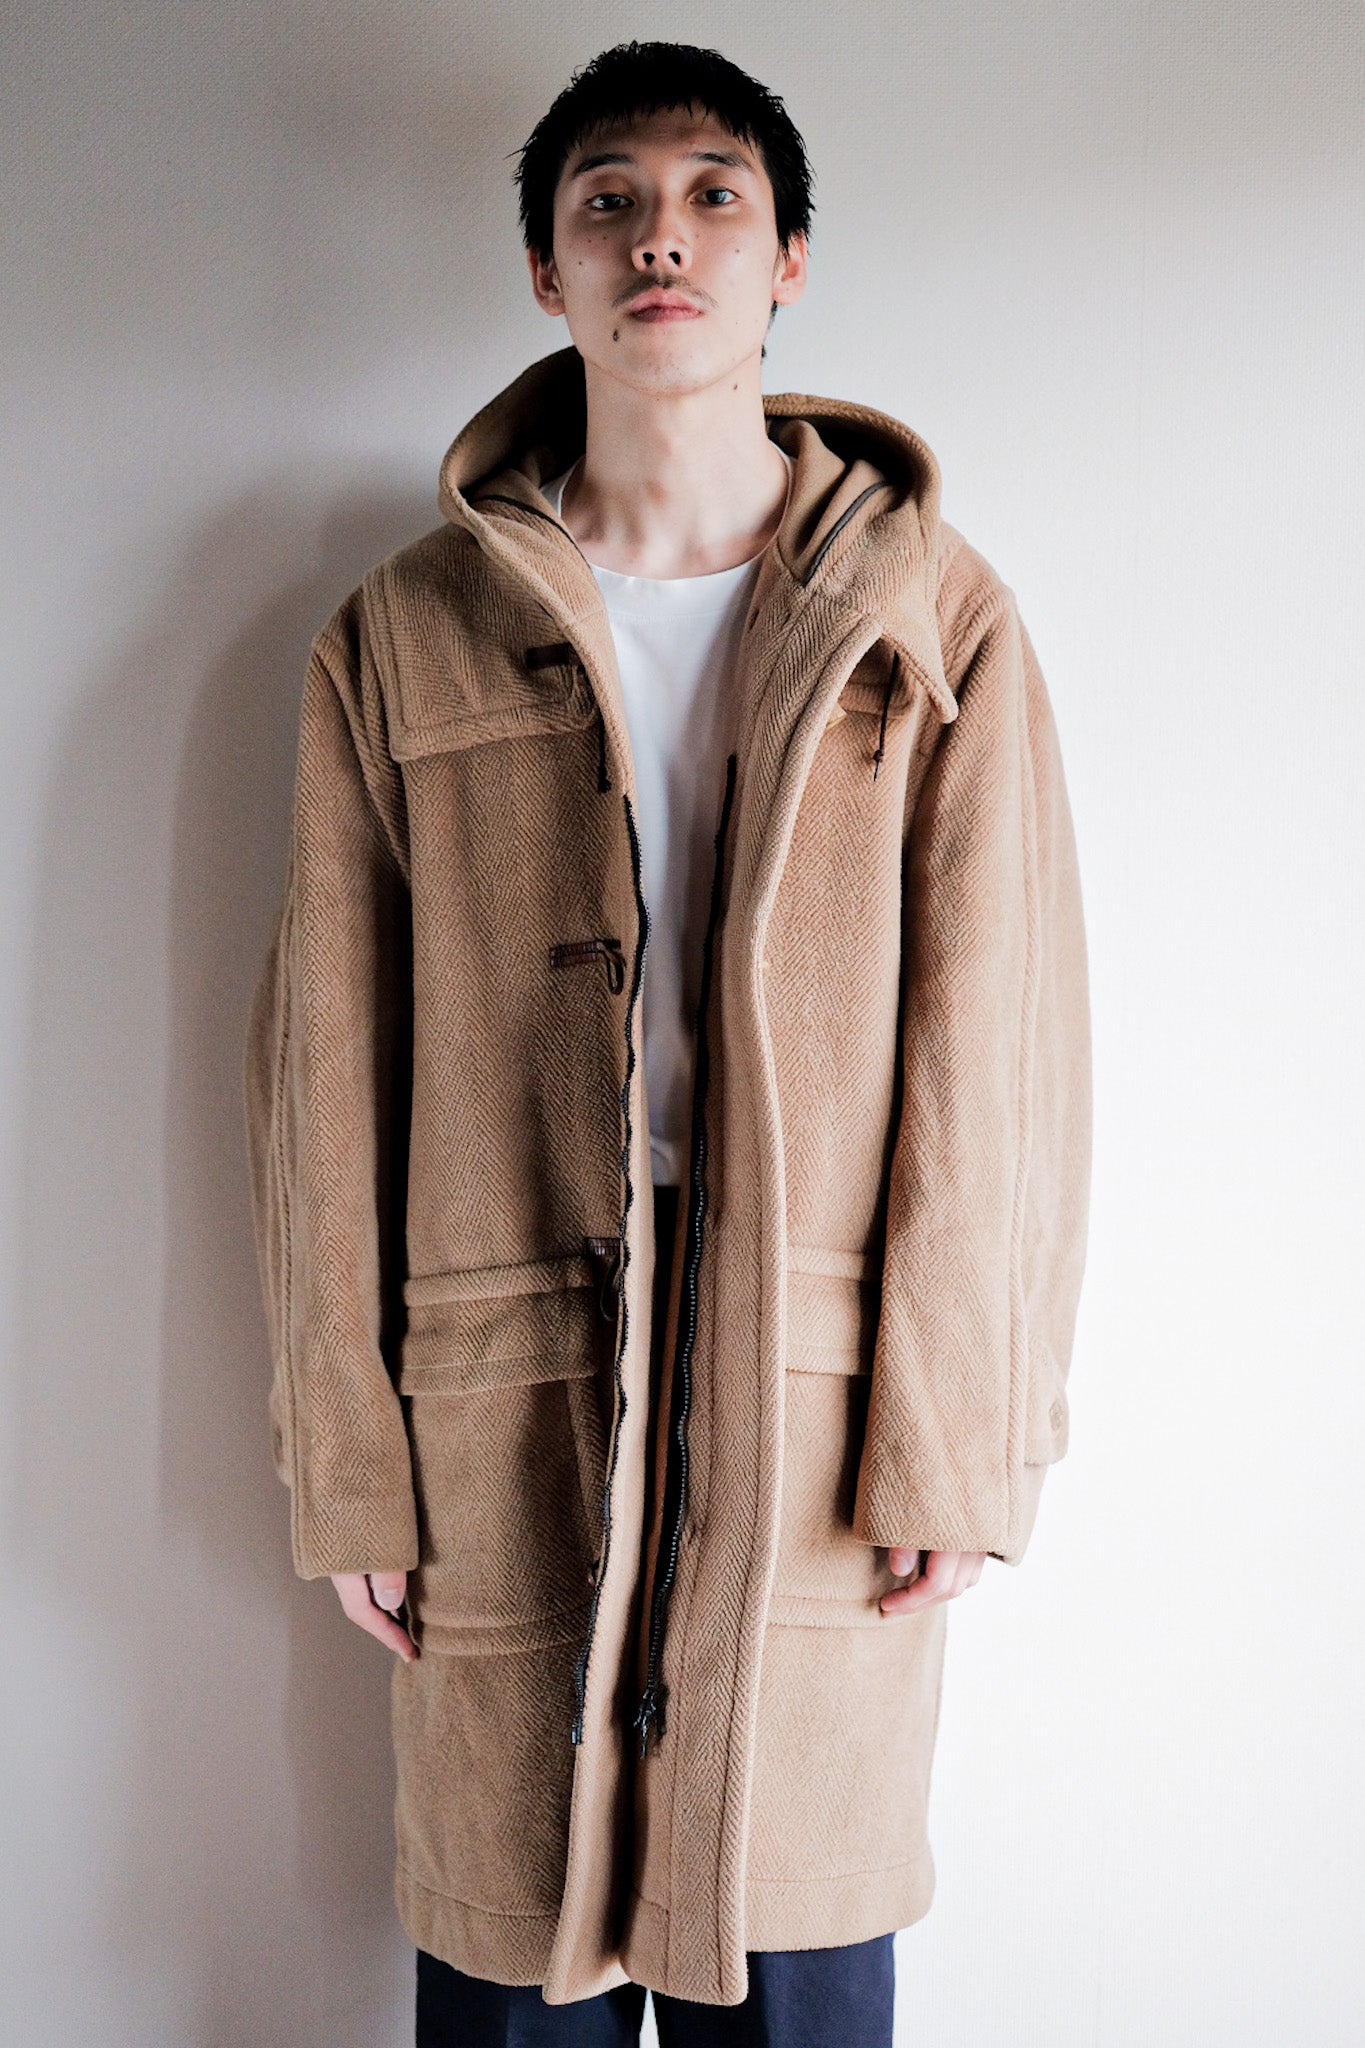 [~ 80's] OLD ENGLAND WOOL DUFFLE COAT MADE BY INVERTERE "MOORBROOK"